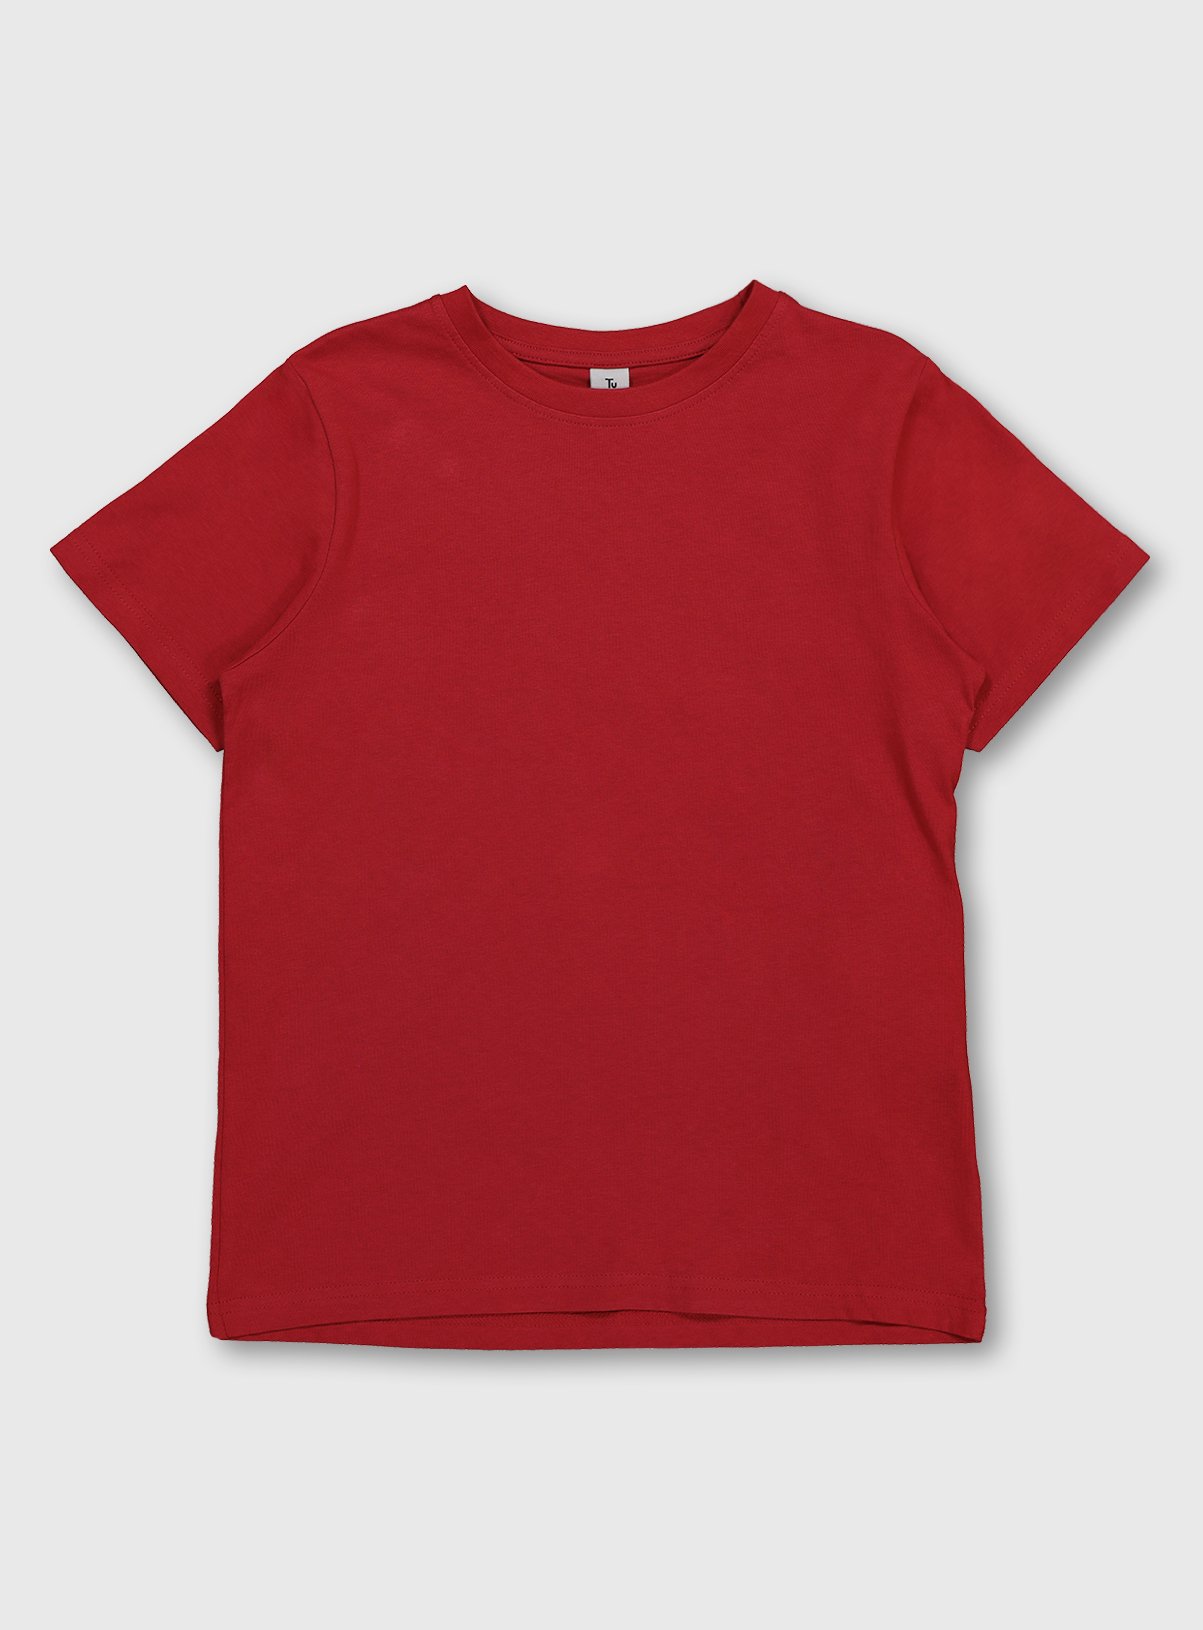 Red Crew Neck T-Shirt Review